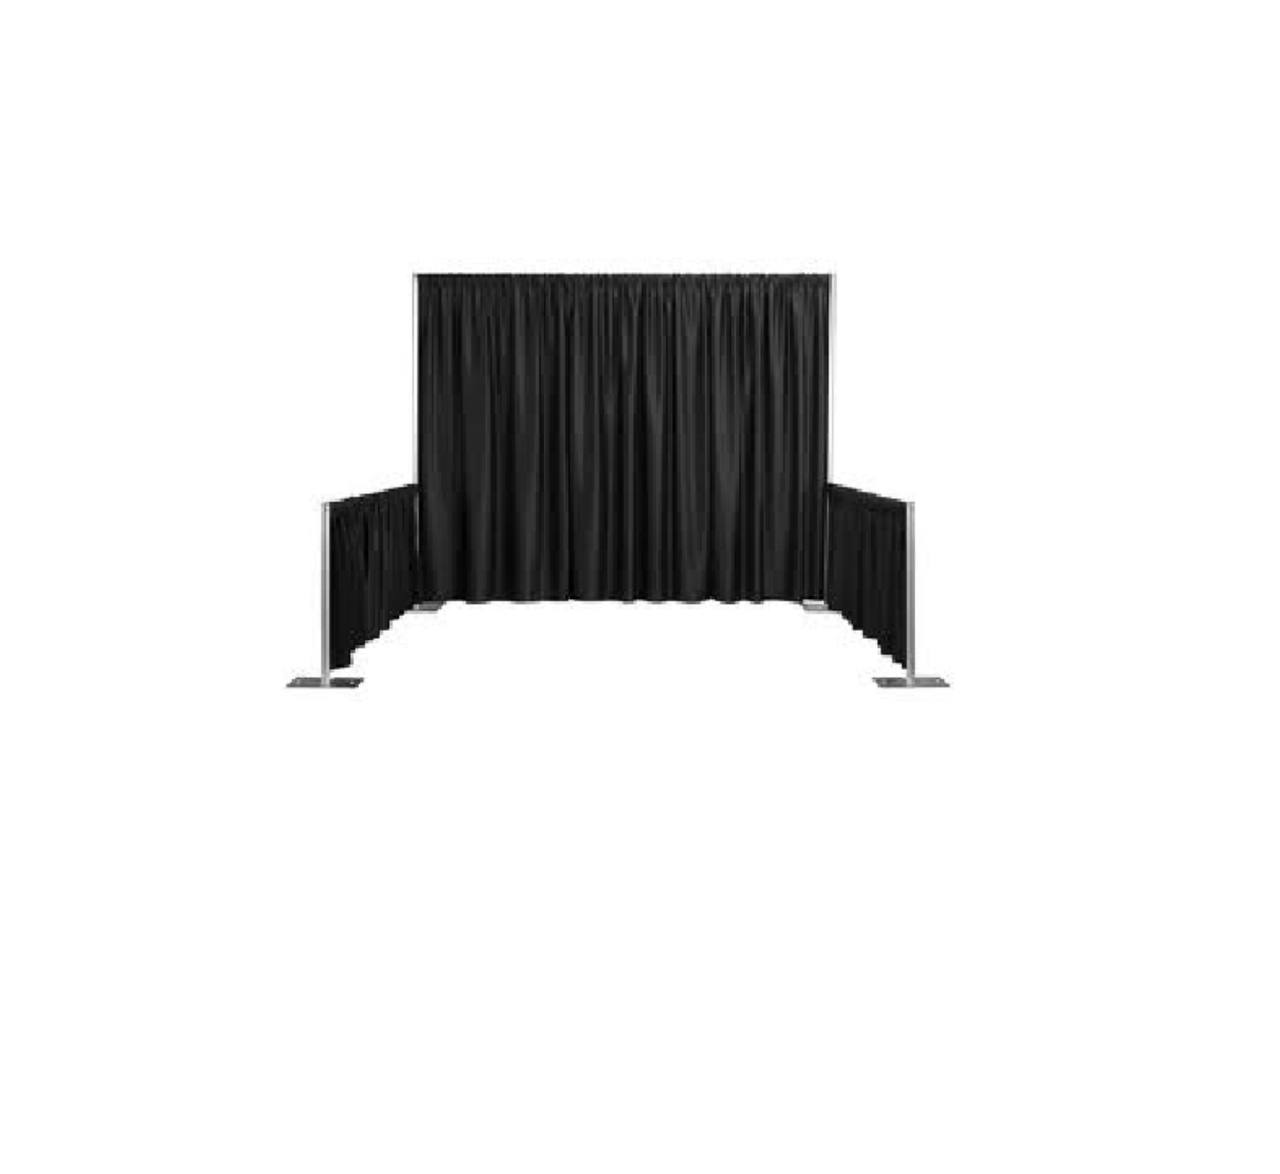 Pipe and Drape Rental (Priced by the feet)